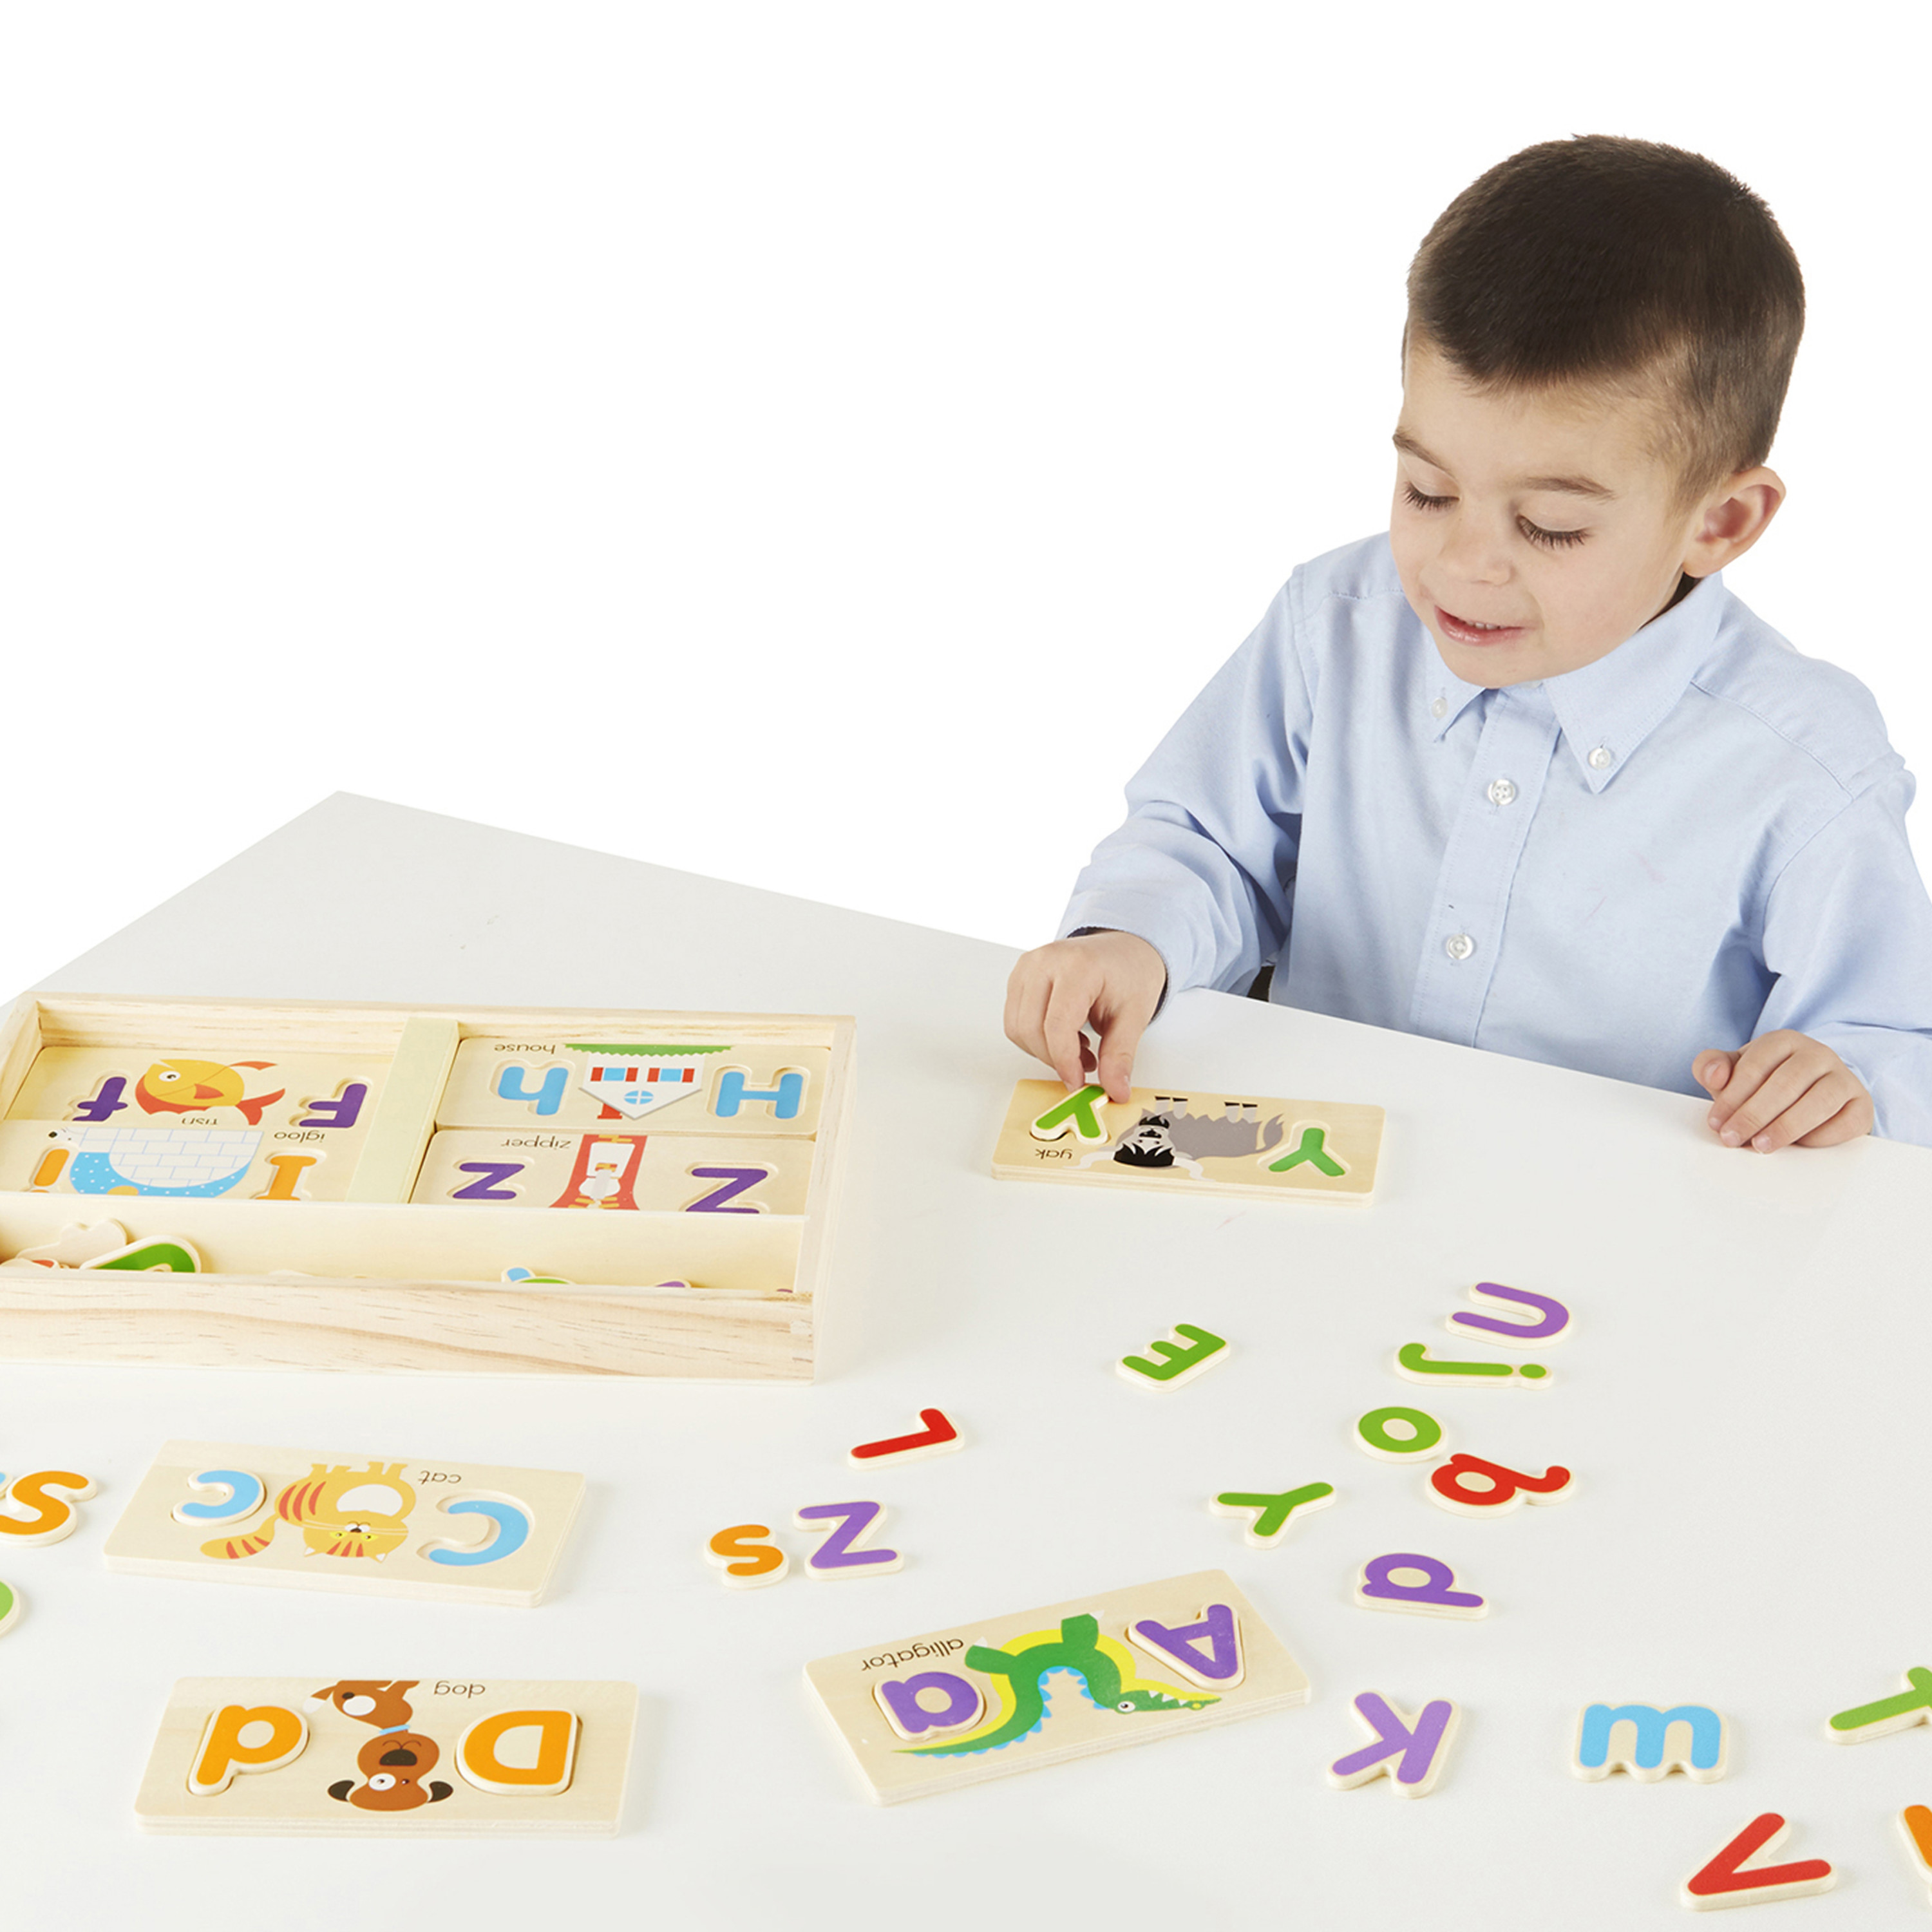 Melissa & Doug ABC Picture Boards - Educational Toy With 13 Double-Sided Wooden Boards and 52 Letters - image 5 of 9